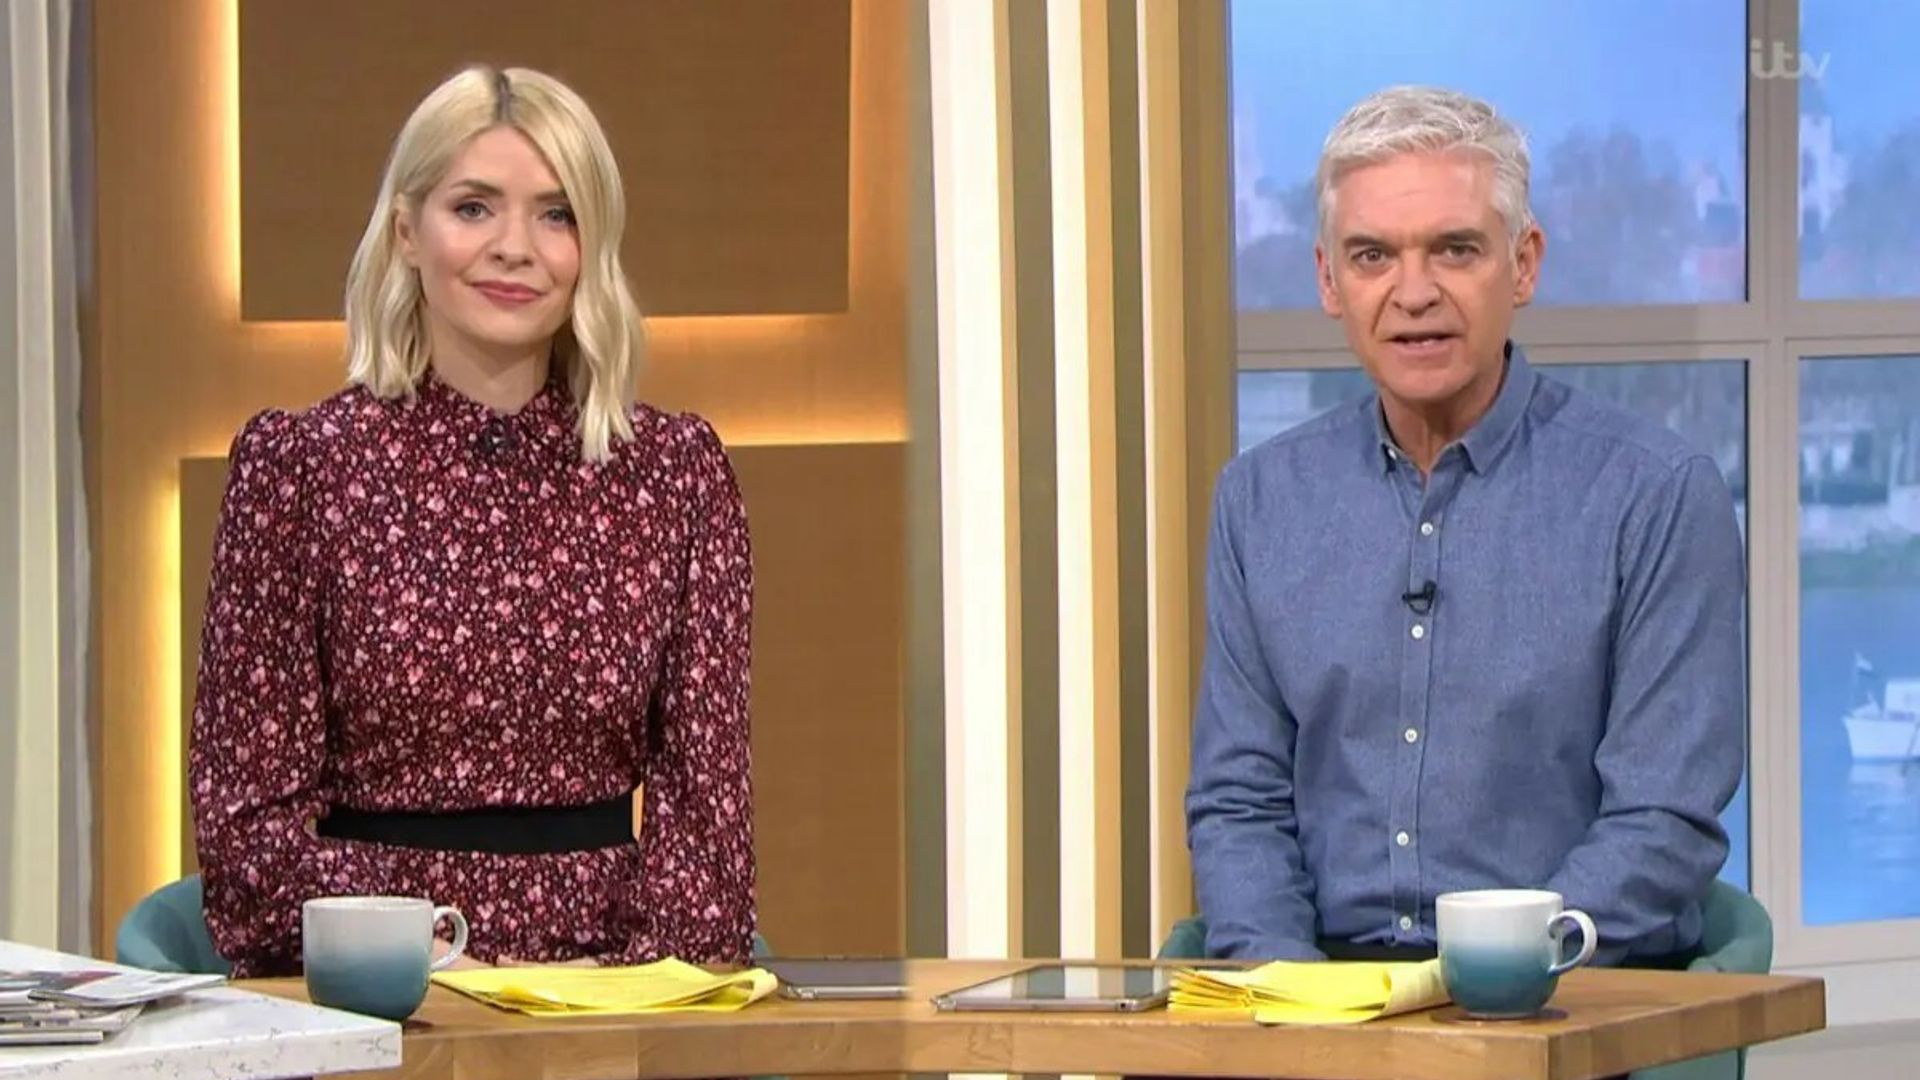 This Morning viewers left emotional following heartbreaking story